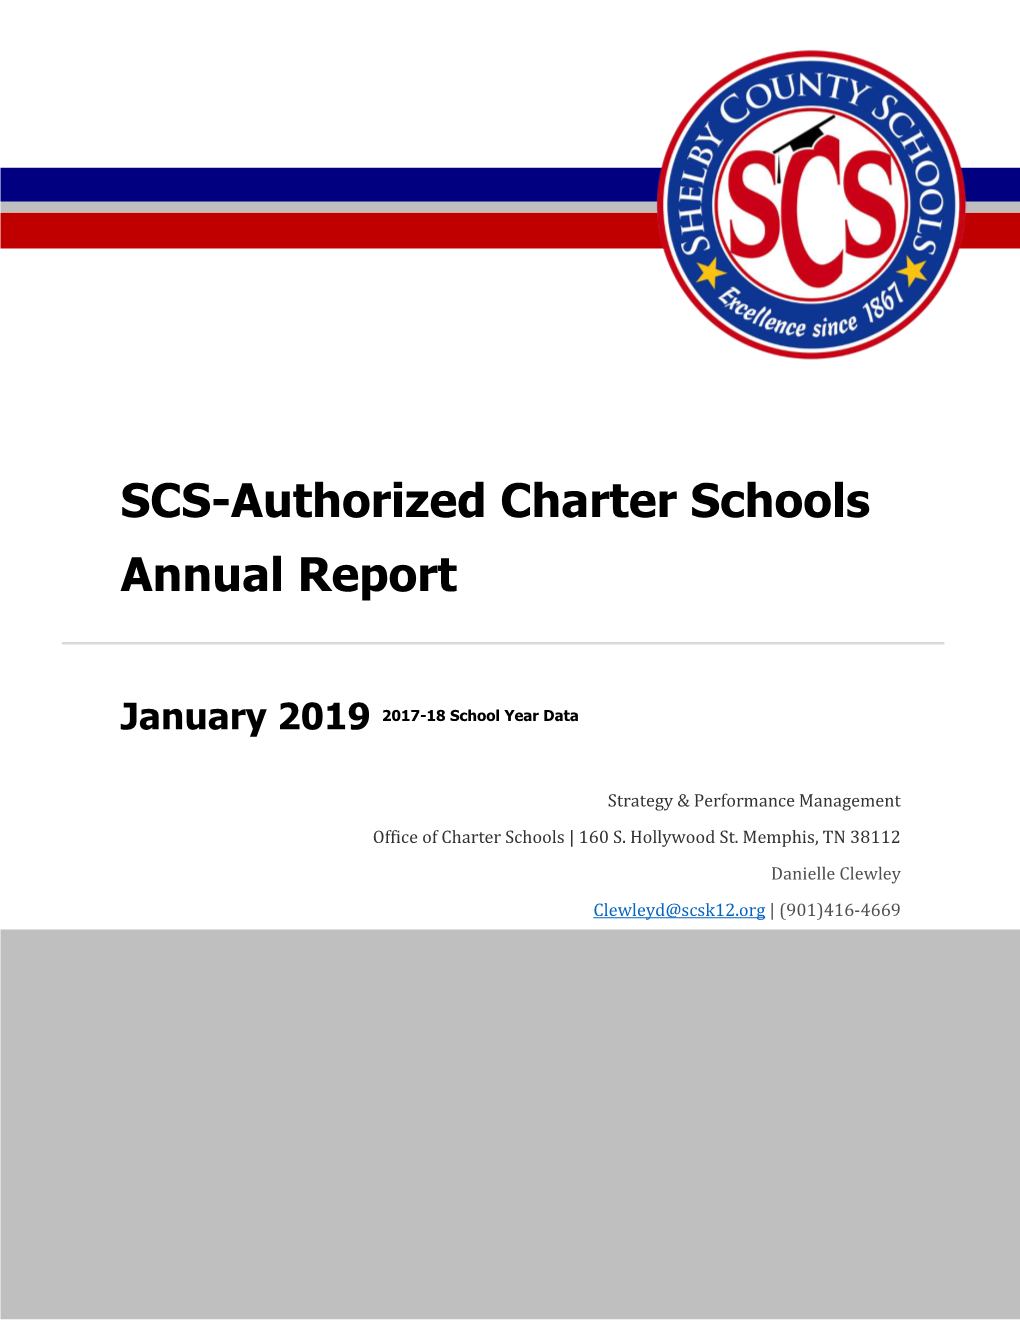 SCS-Authorized Charter Schools Annual Report